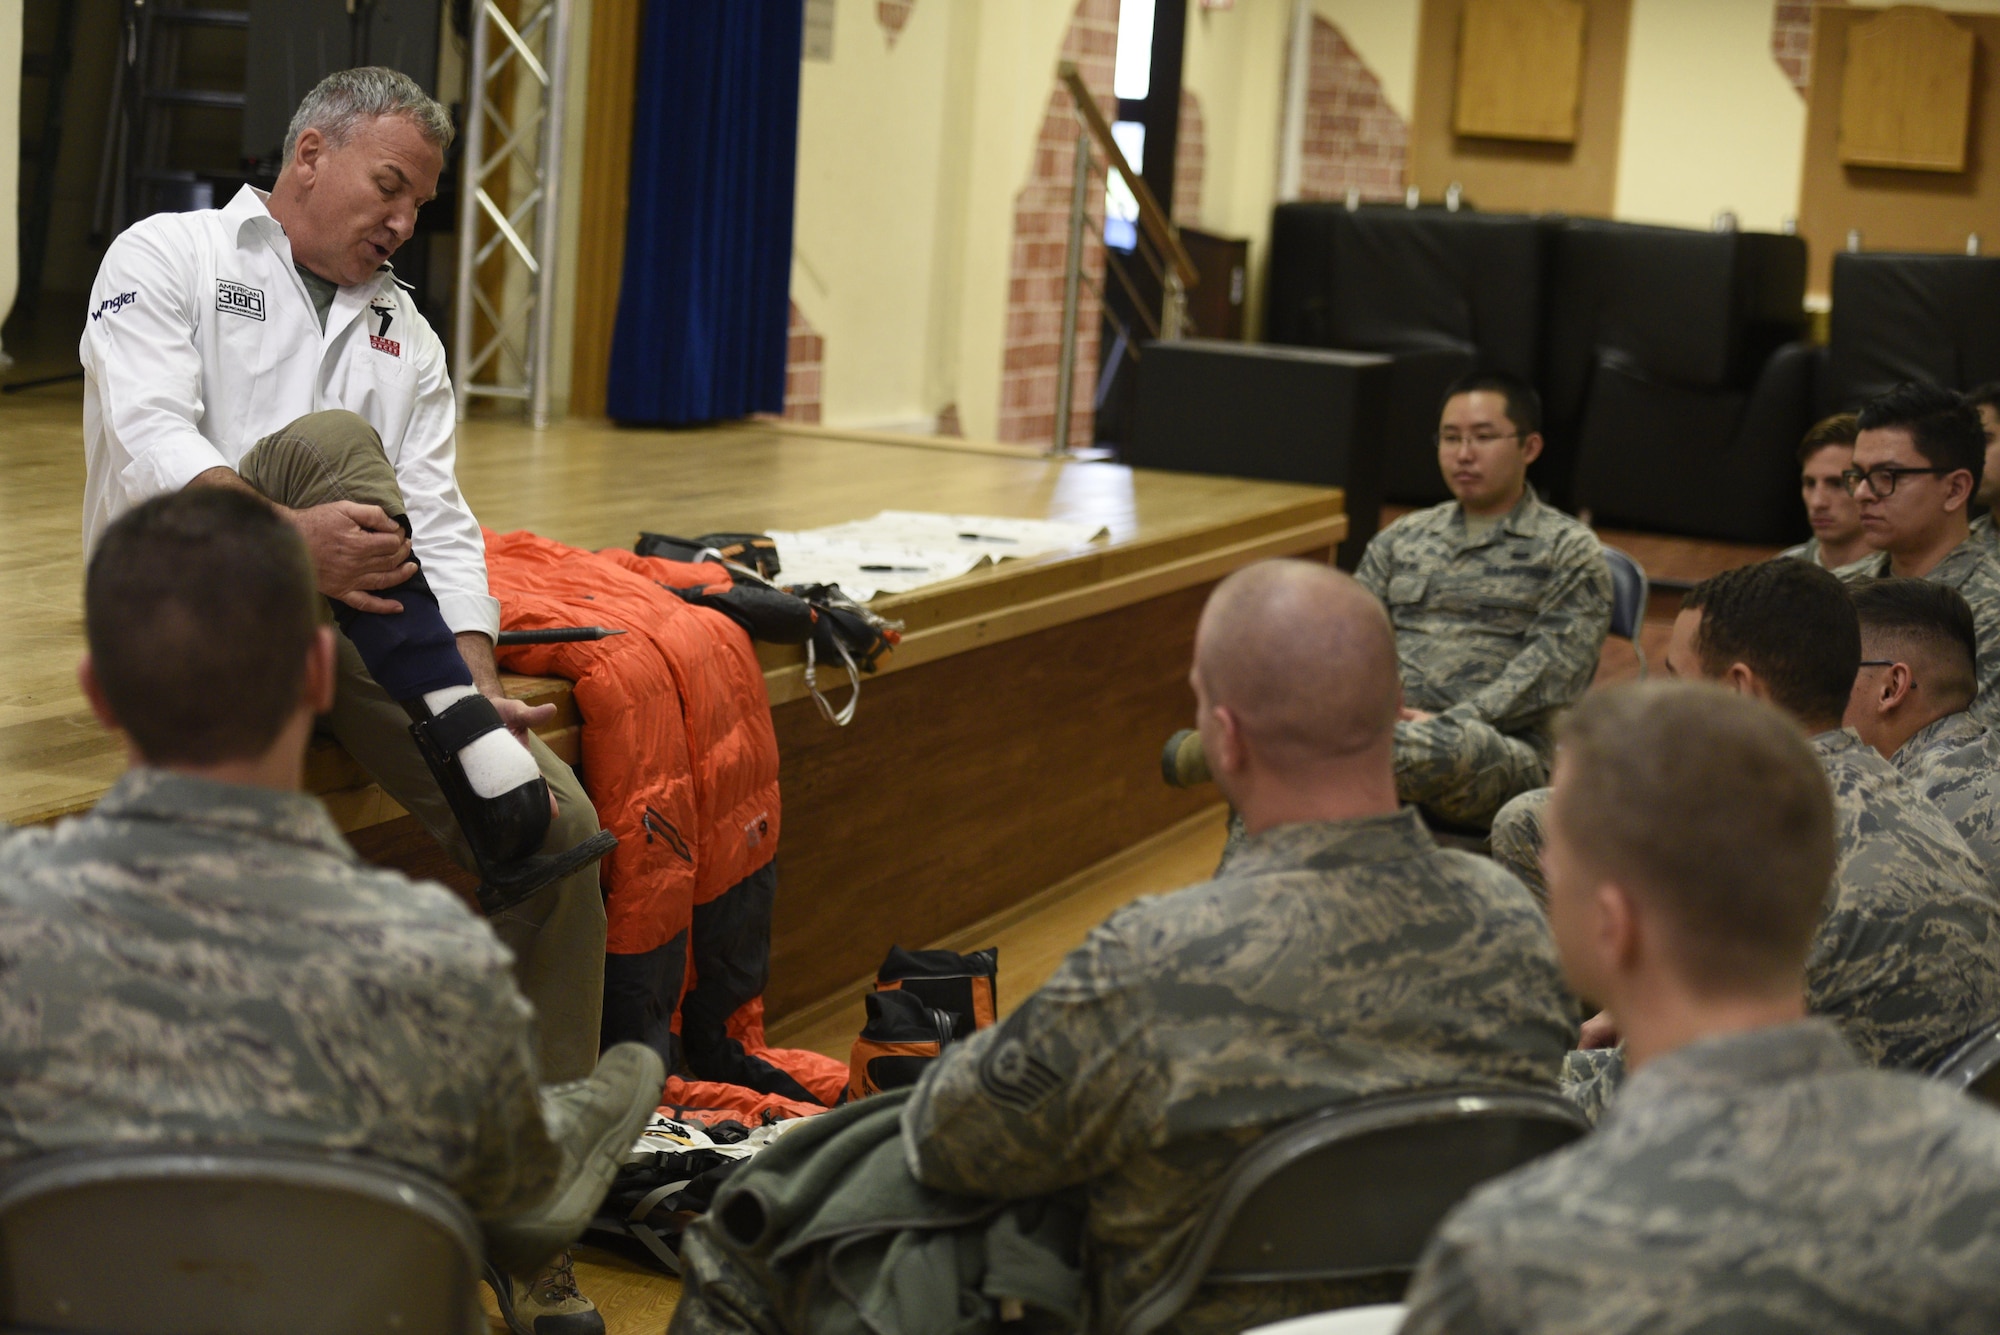 Tom Whittaker, a professional mountain climber, speaks to Airmen about personal resiliency at the Brick House on Spangdahlem Air Base, Germany, Nov. 10, 2016. Whittaker spoke about resiliency as first person with a disability to climb Mount Everest. (U.S. Air Force photo by Staff Sgt. Jonathan Snyder)